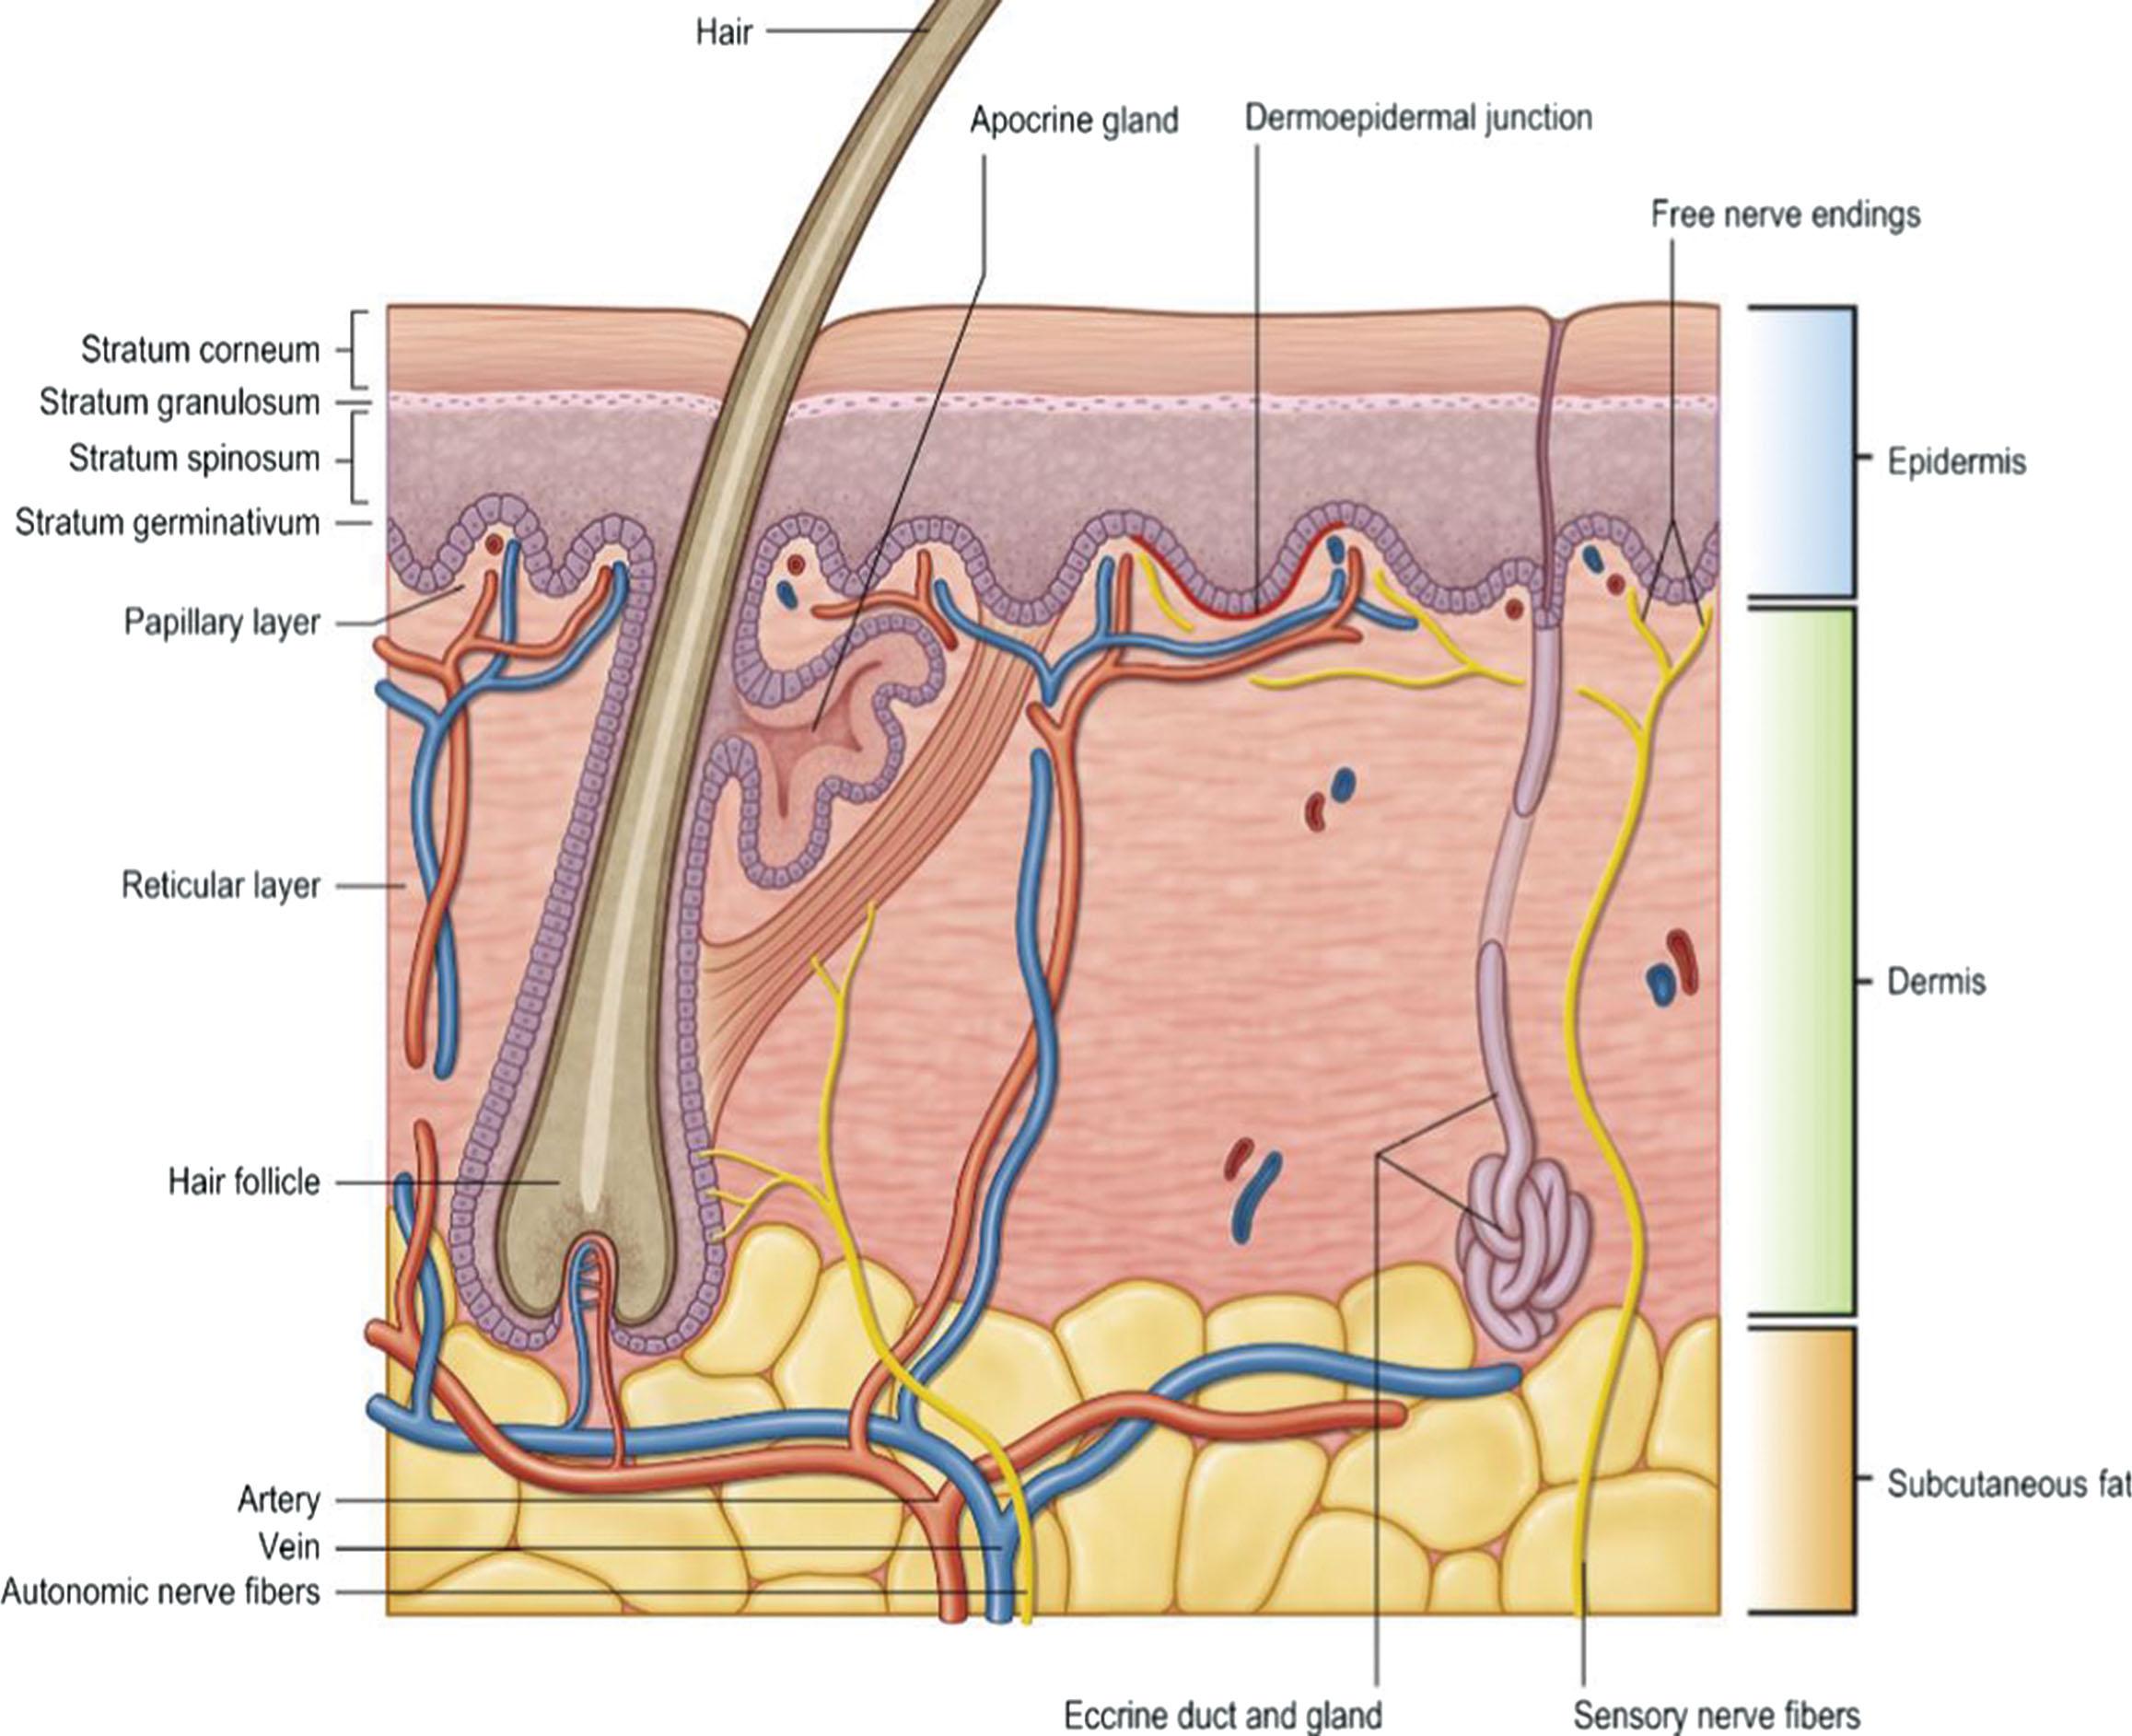 Fig. 12.3, Diagram showing the epidermis, dermis, subcutaneous fat, and the adnexal structures within the skin.